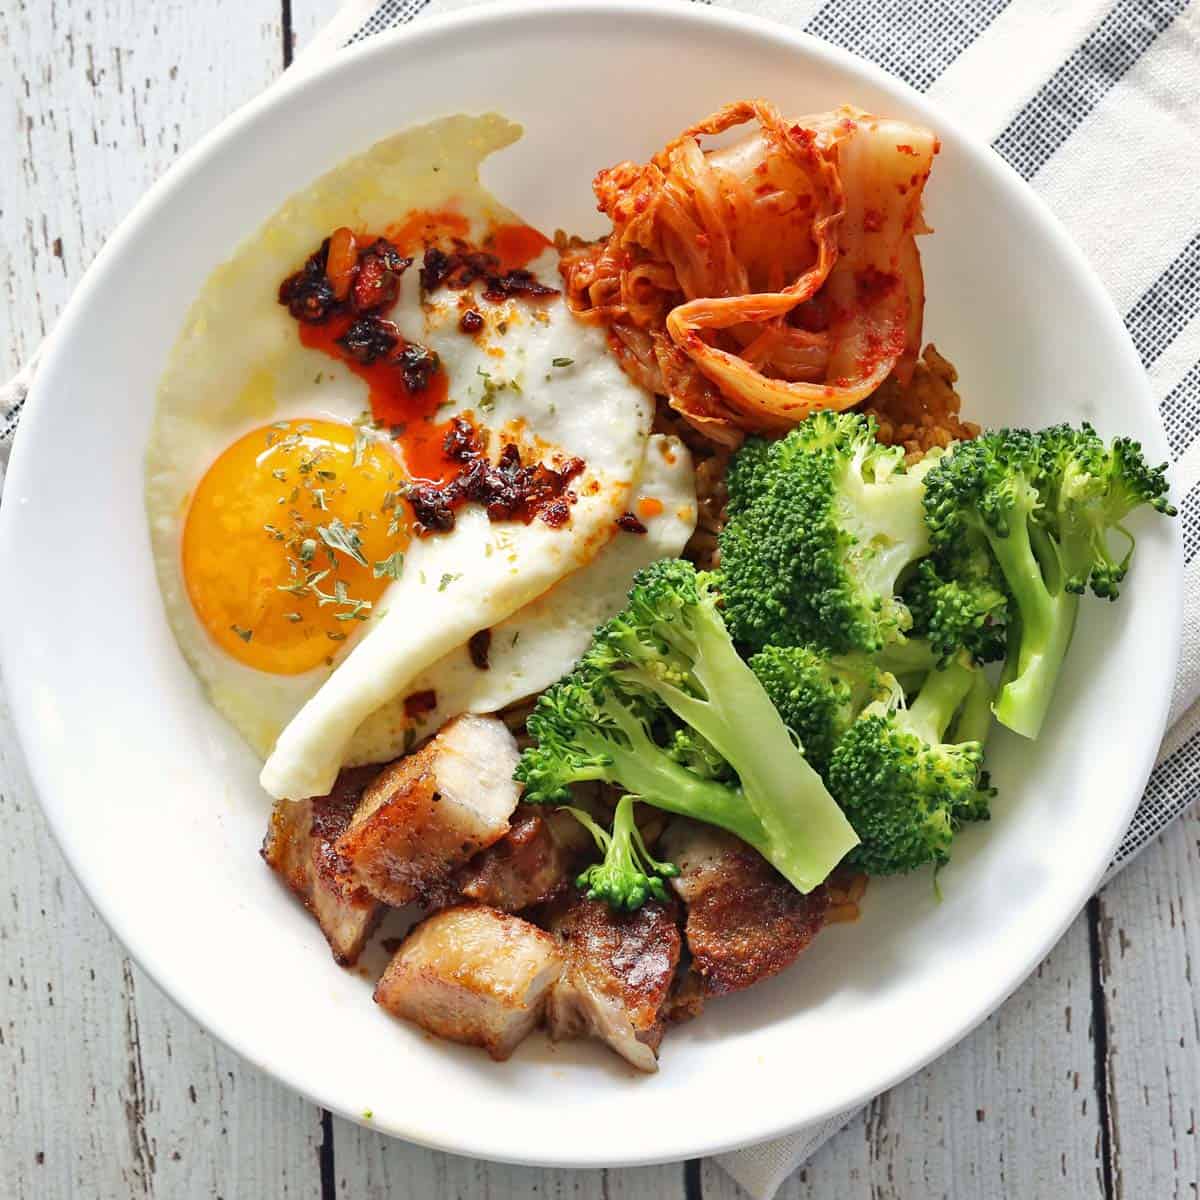 A bowl with pork belly, broccoli, a fried egg, and kimchi.